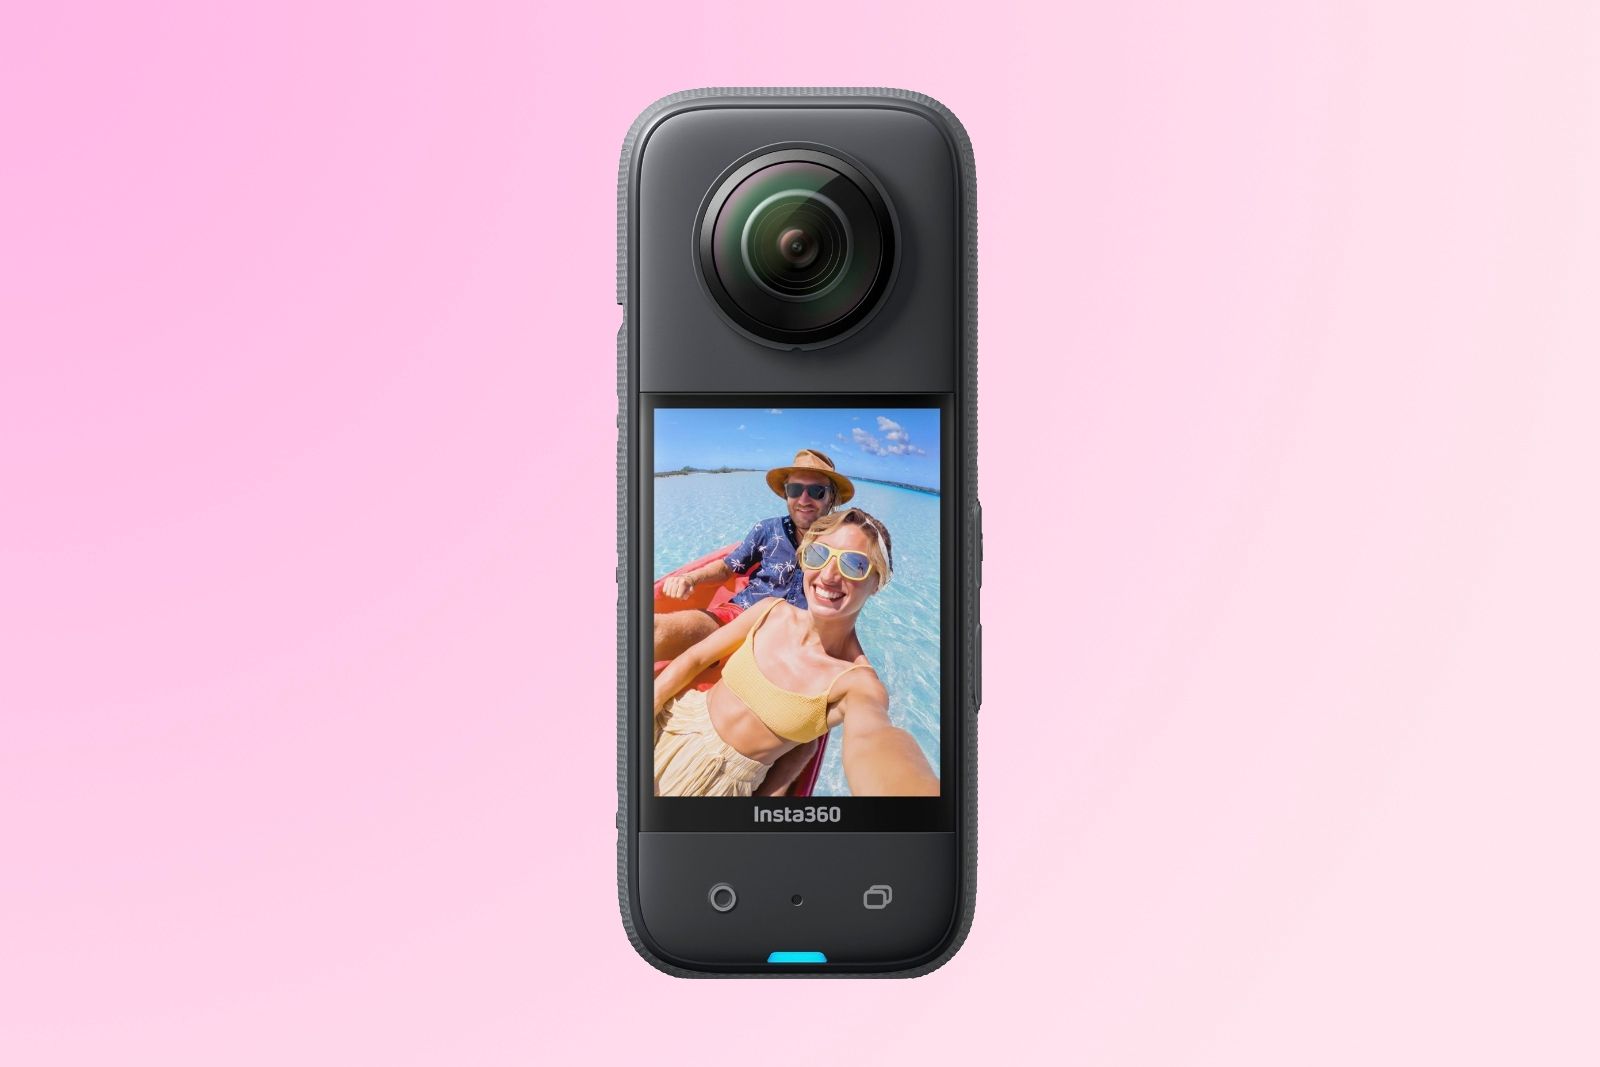 A vertical camera with a bulbous lens and a portrait screen with an image of people on the front.